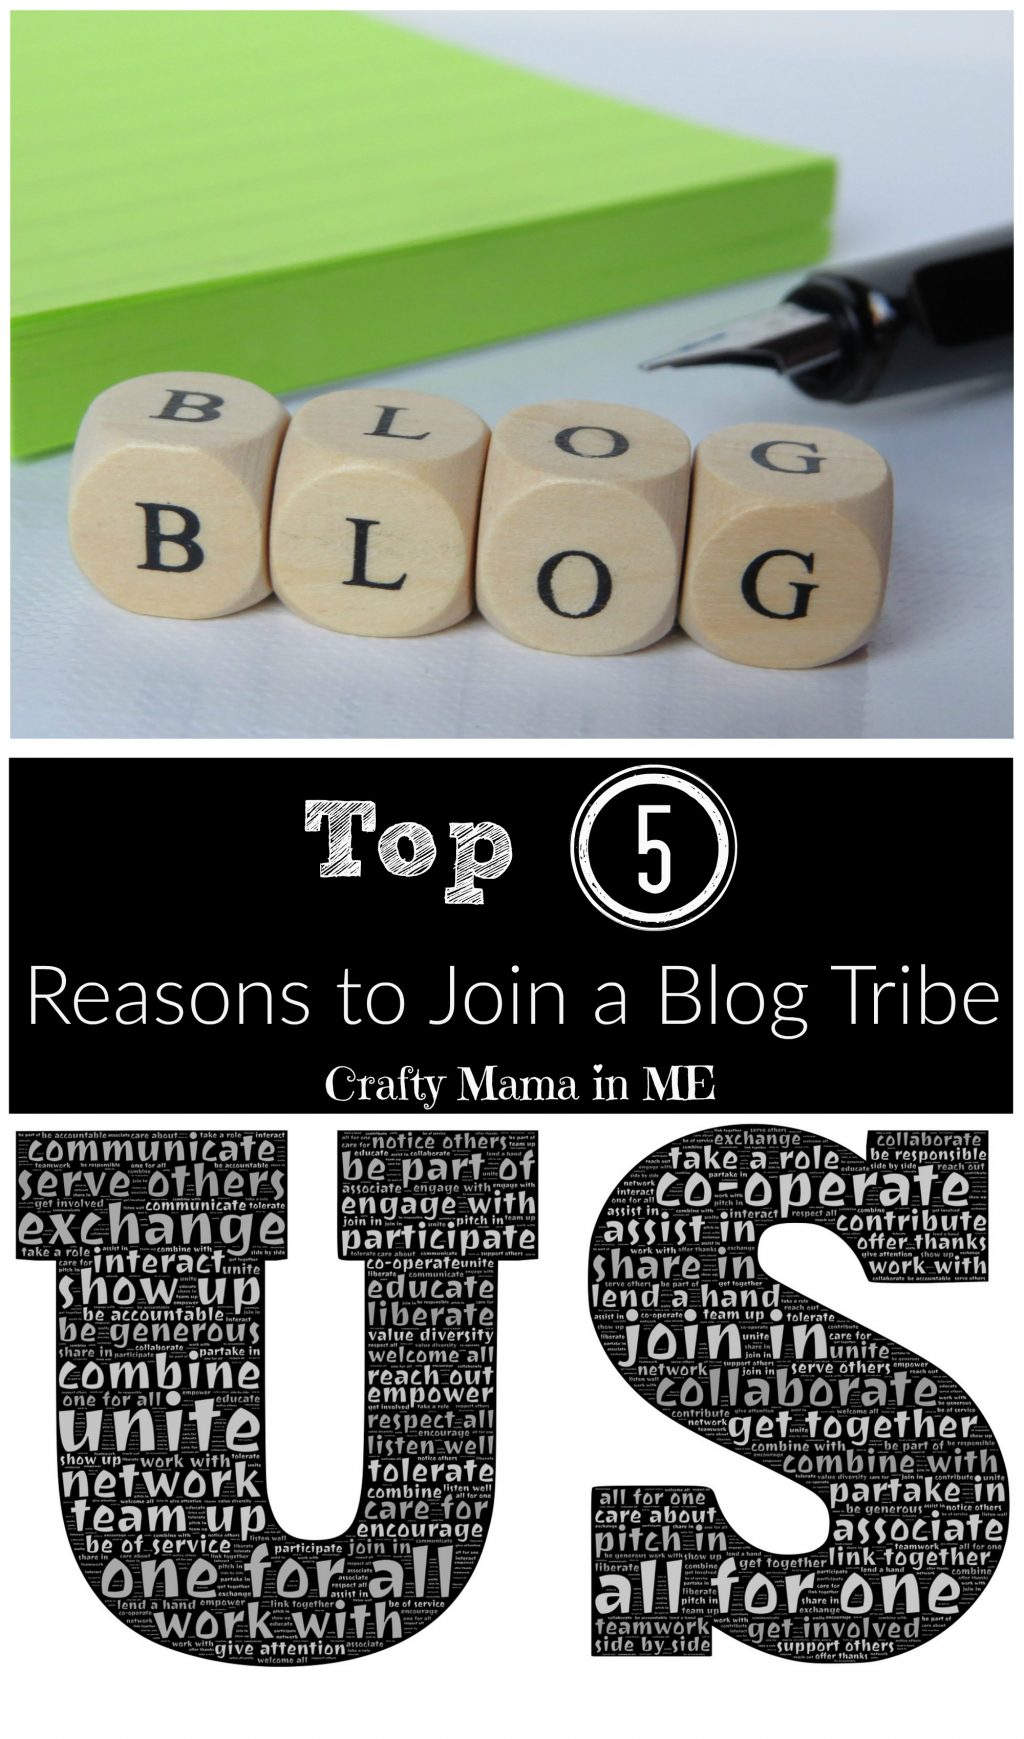 The Top 5 Reasons to Join a Blog Tribe 